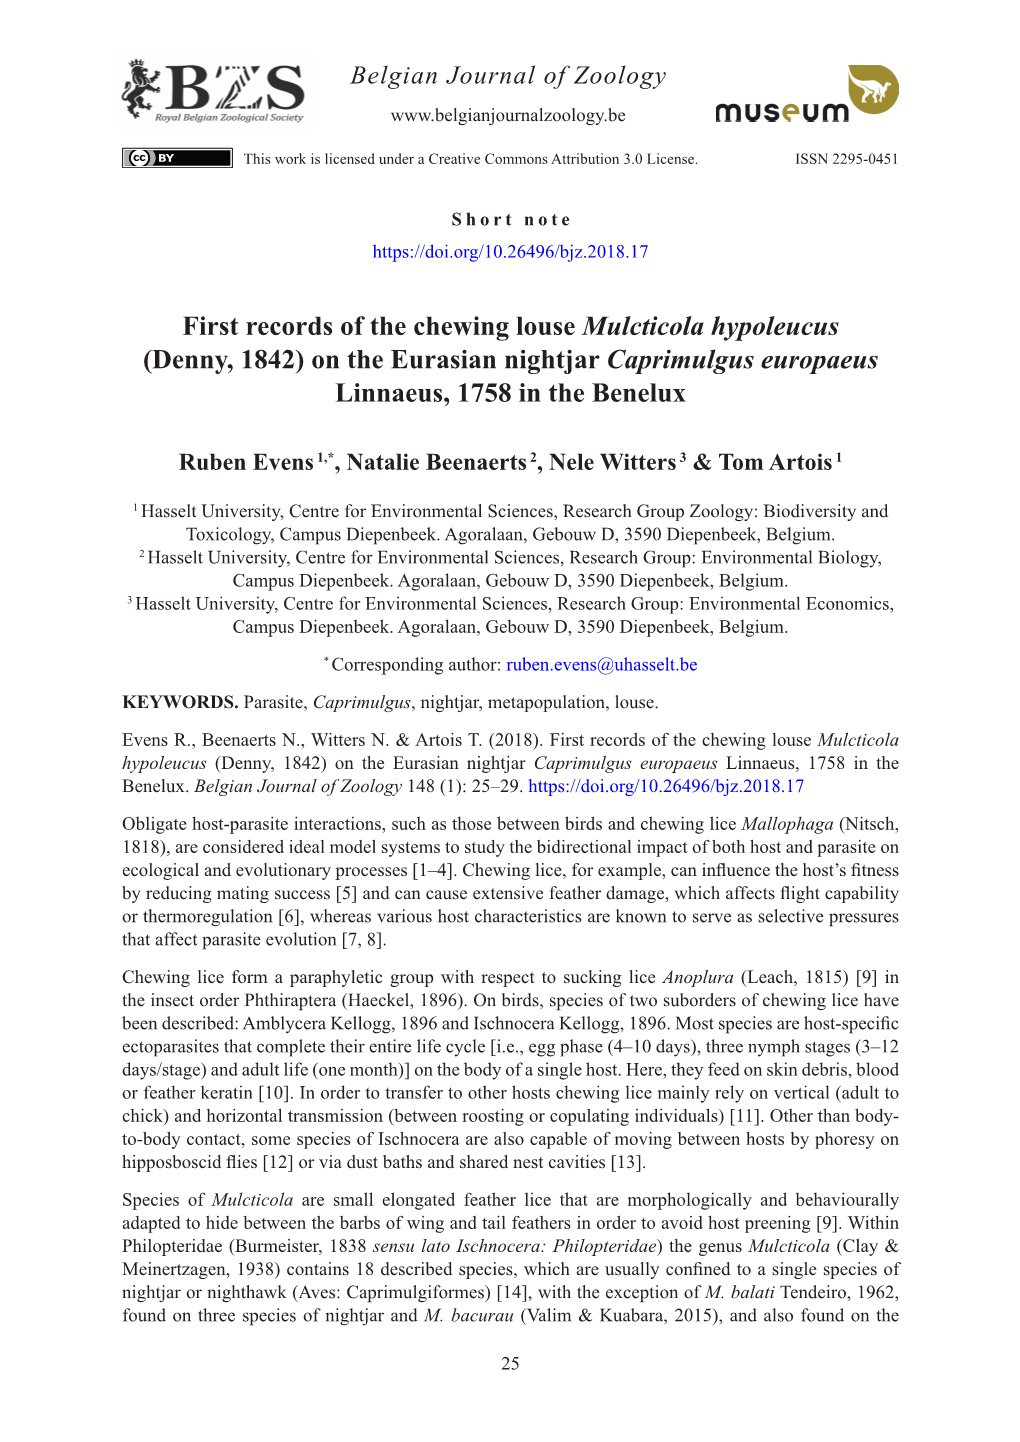 First Records of the Chewing Louse Mulcticola Hypoleucus (Denny, 1842) on the Eurasian Nightjar Caprimulgus Europaeus Linnaeus, 1758 in the Benelux